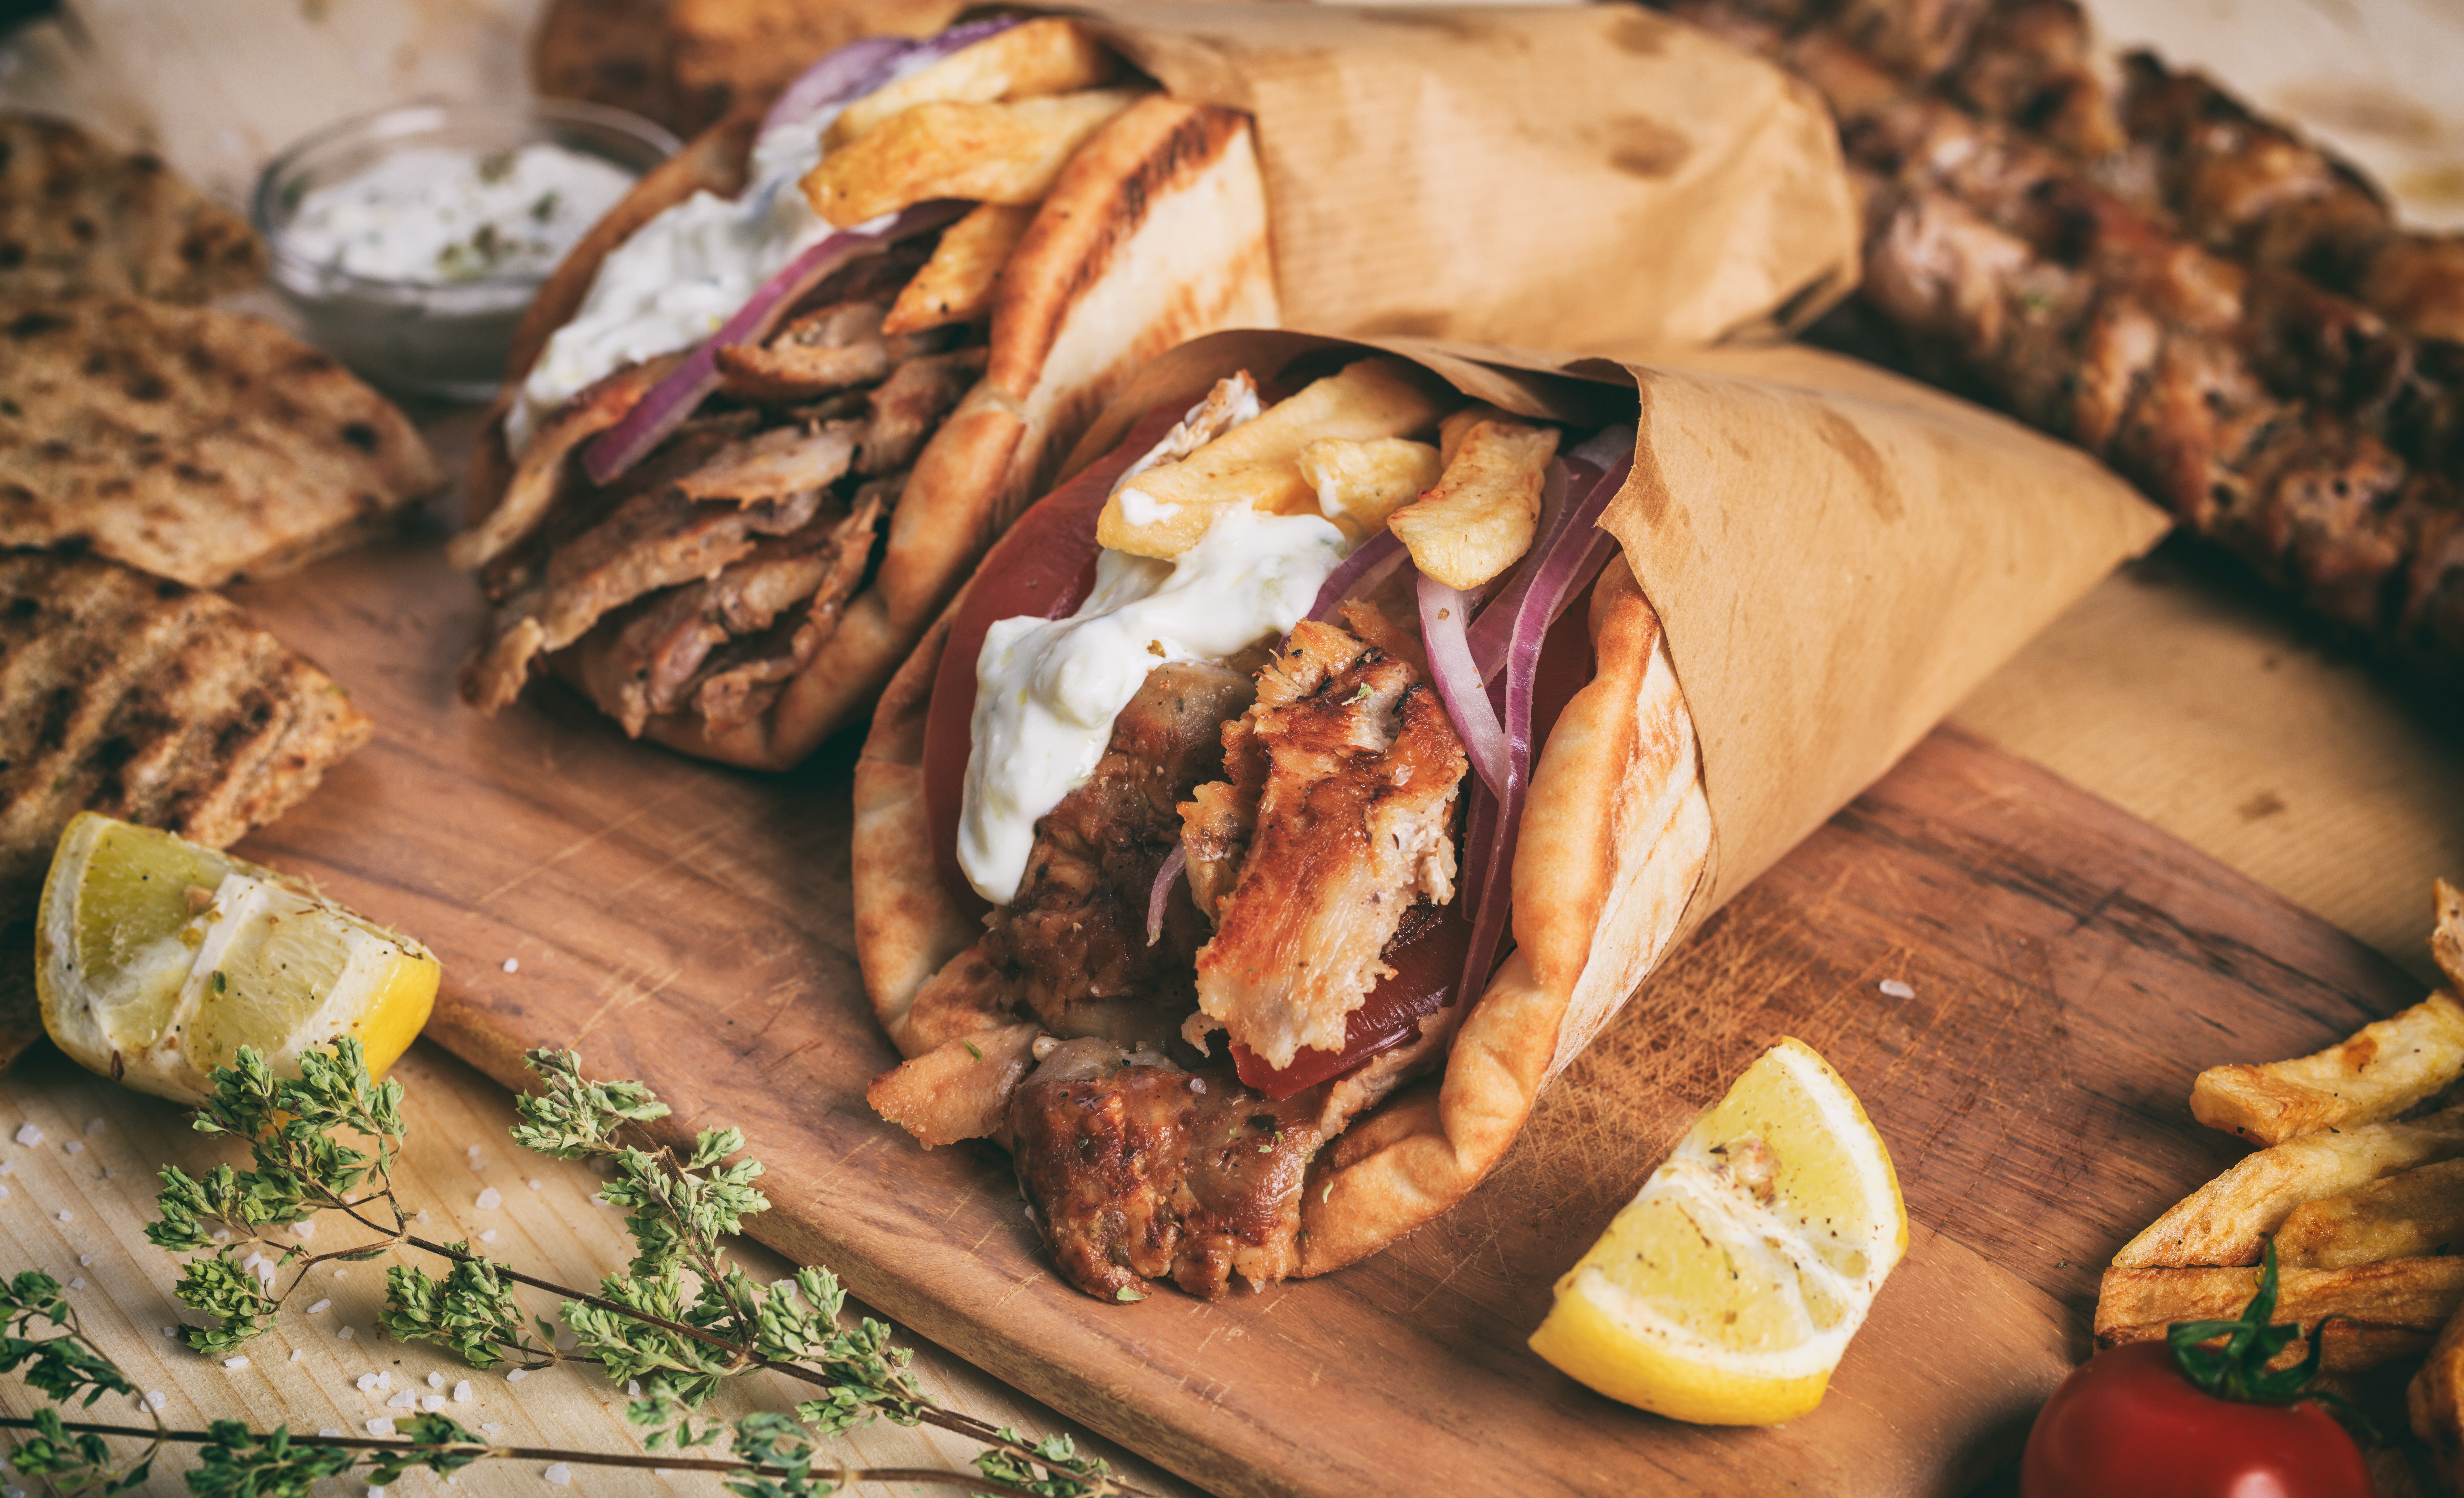 Greek food, like gyros, has been influenced by many of the surrounding cultures.